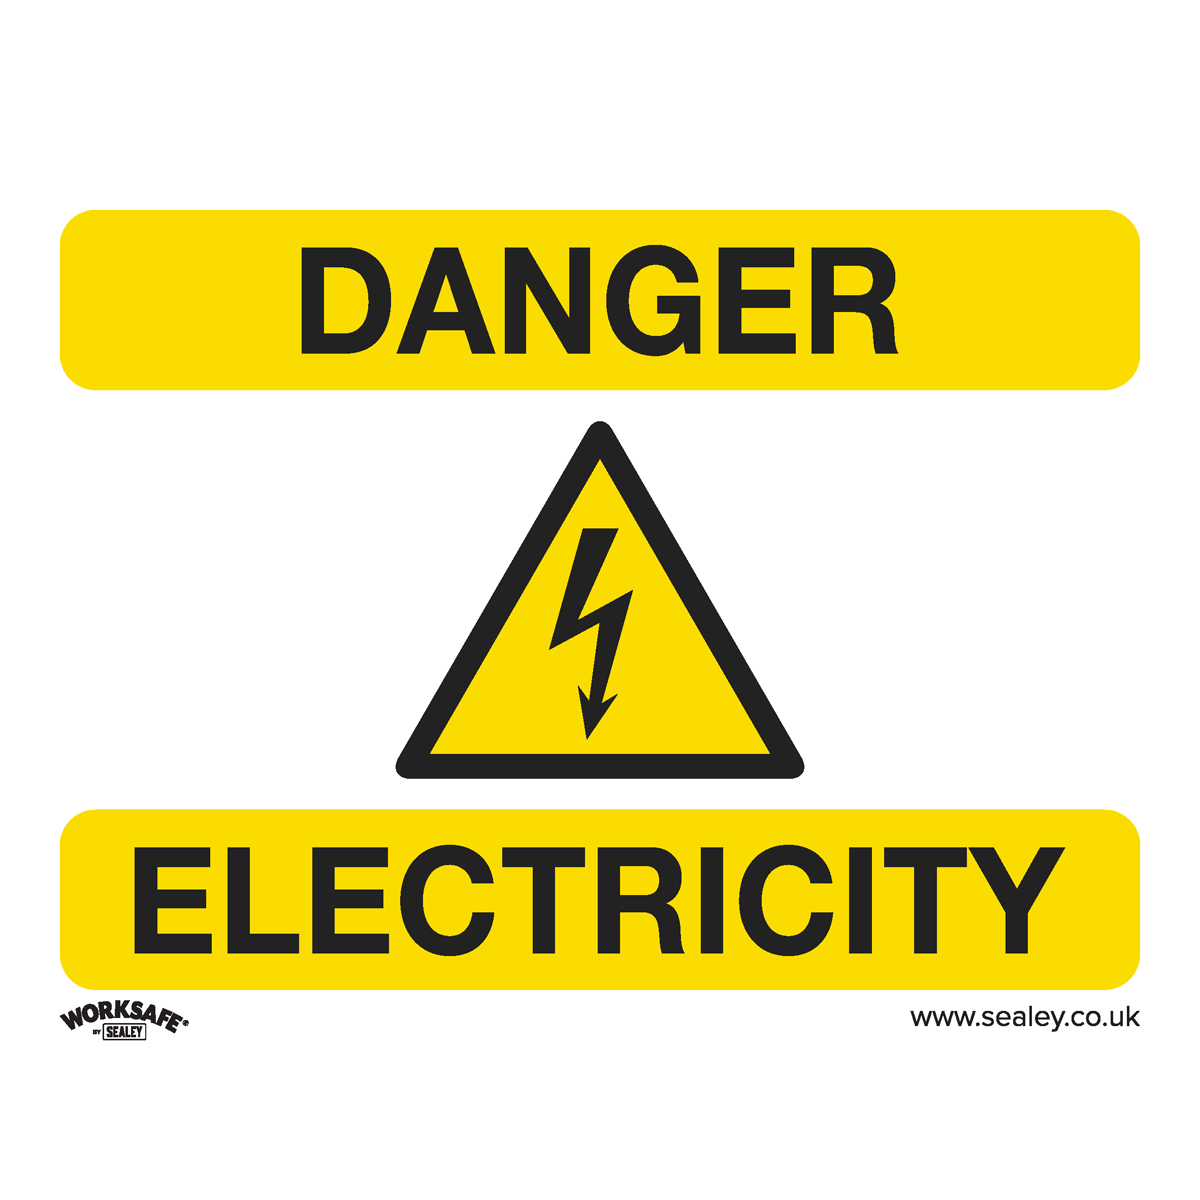 Warning Safety Sign - Danger Electricity - Self-Adhesive Vinyl